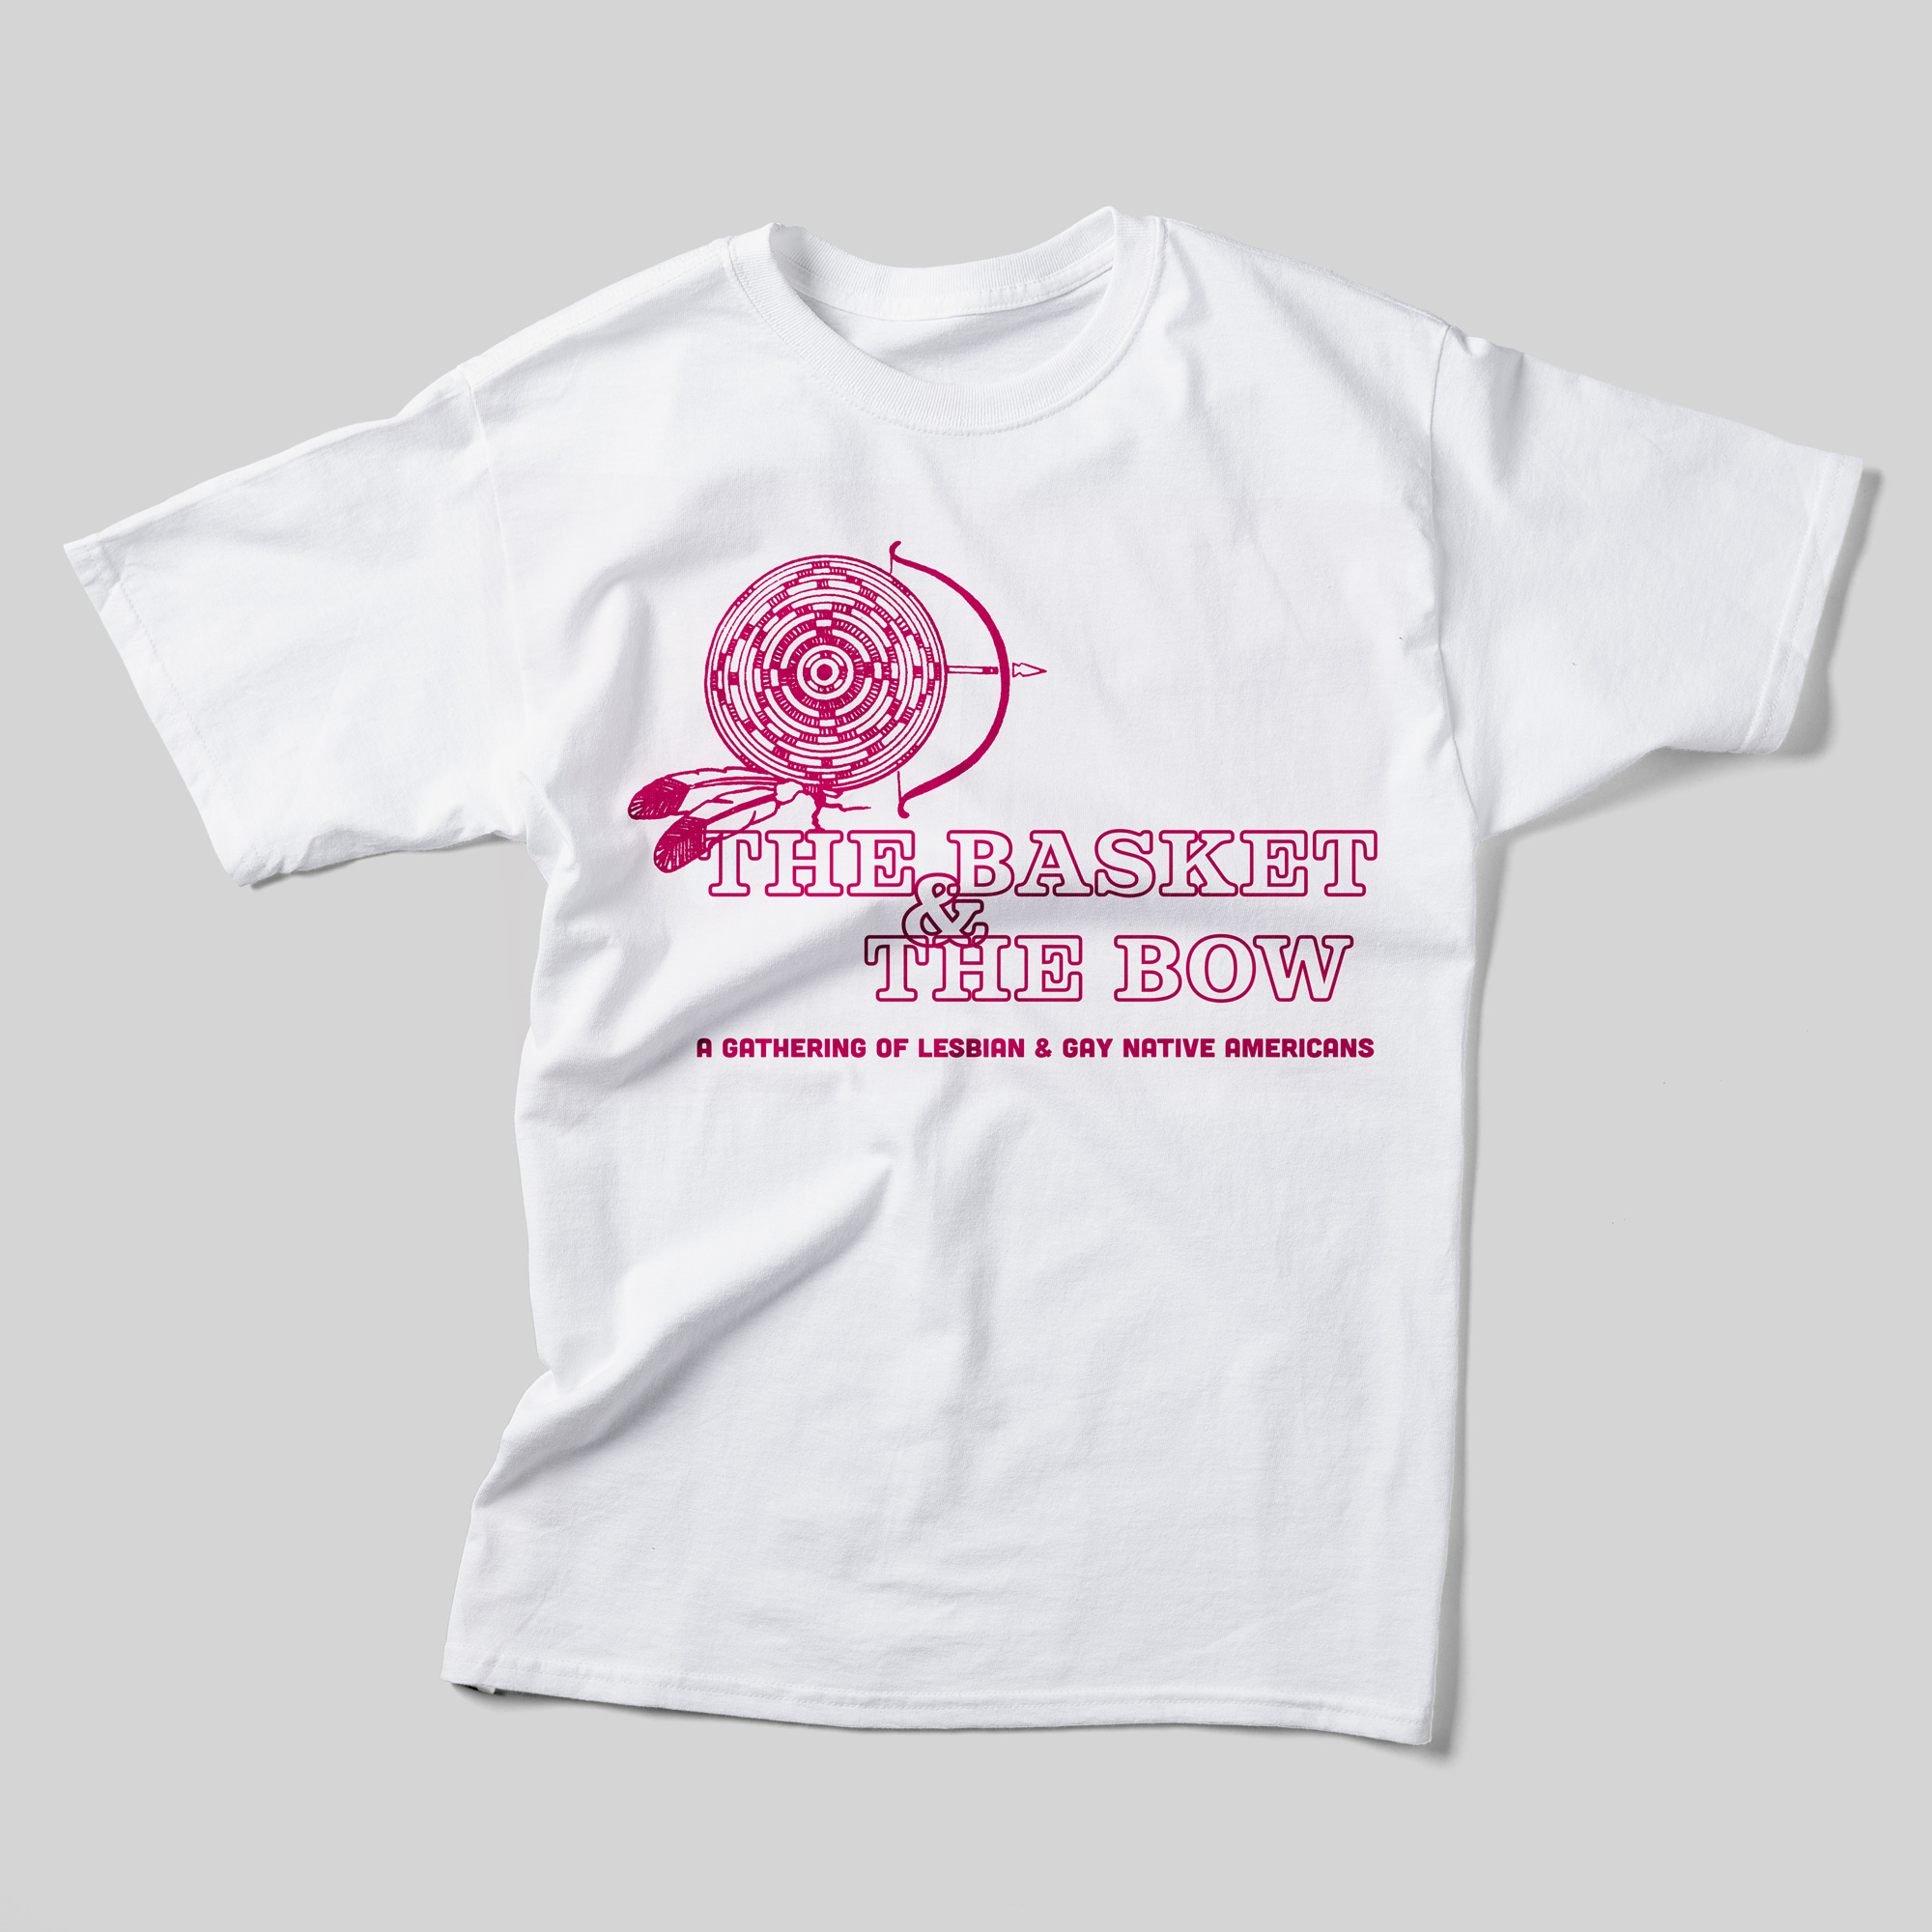 A white t-shirt with all-pink text and illustration. It reads, "The Basket & The Bow: A Gathering of Lesbian and Gay Native Americans." Above the text is an illustration of a basket with two feathers attached and a bow and arrow just behind it.